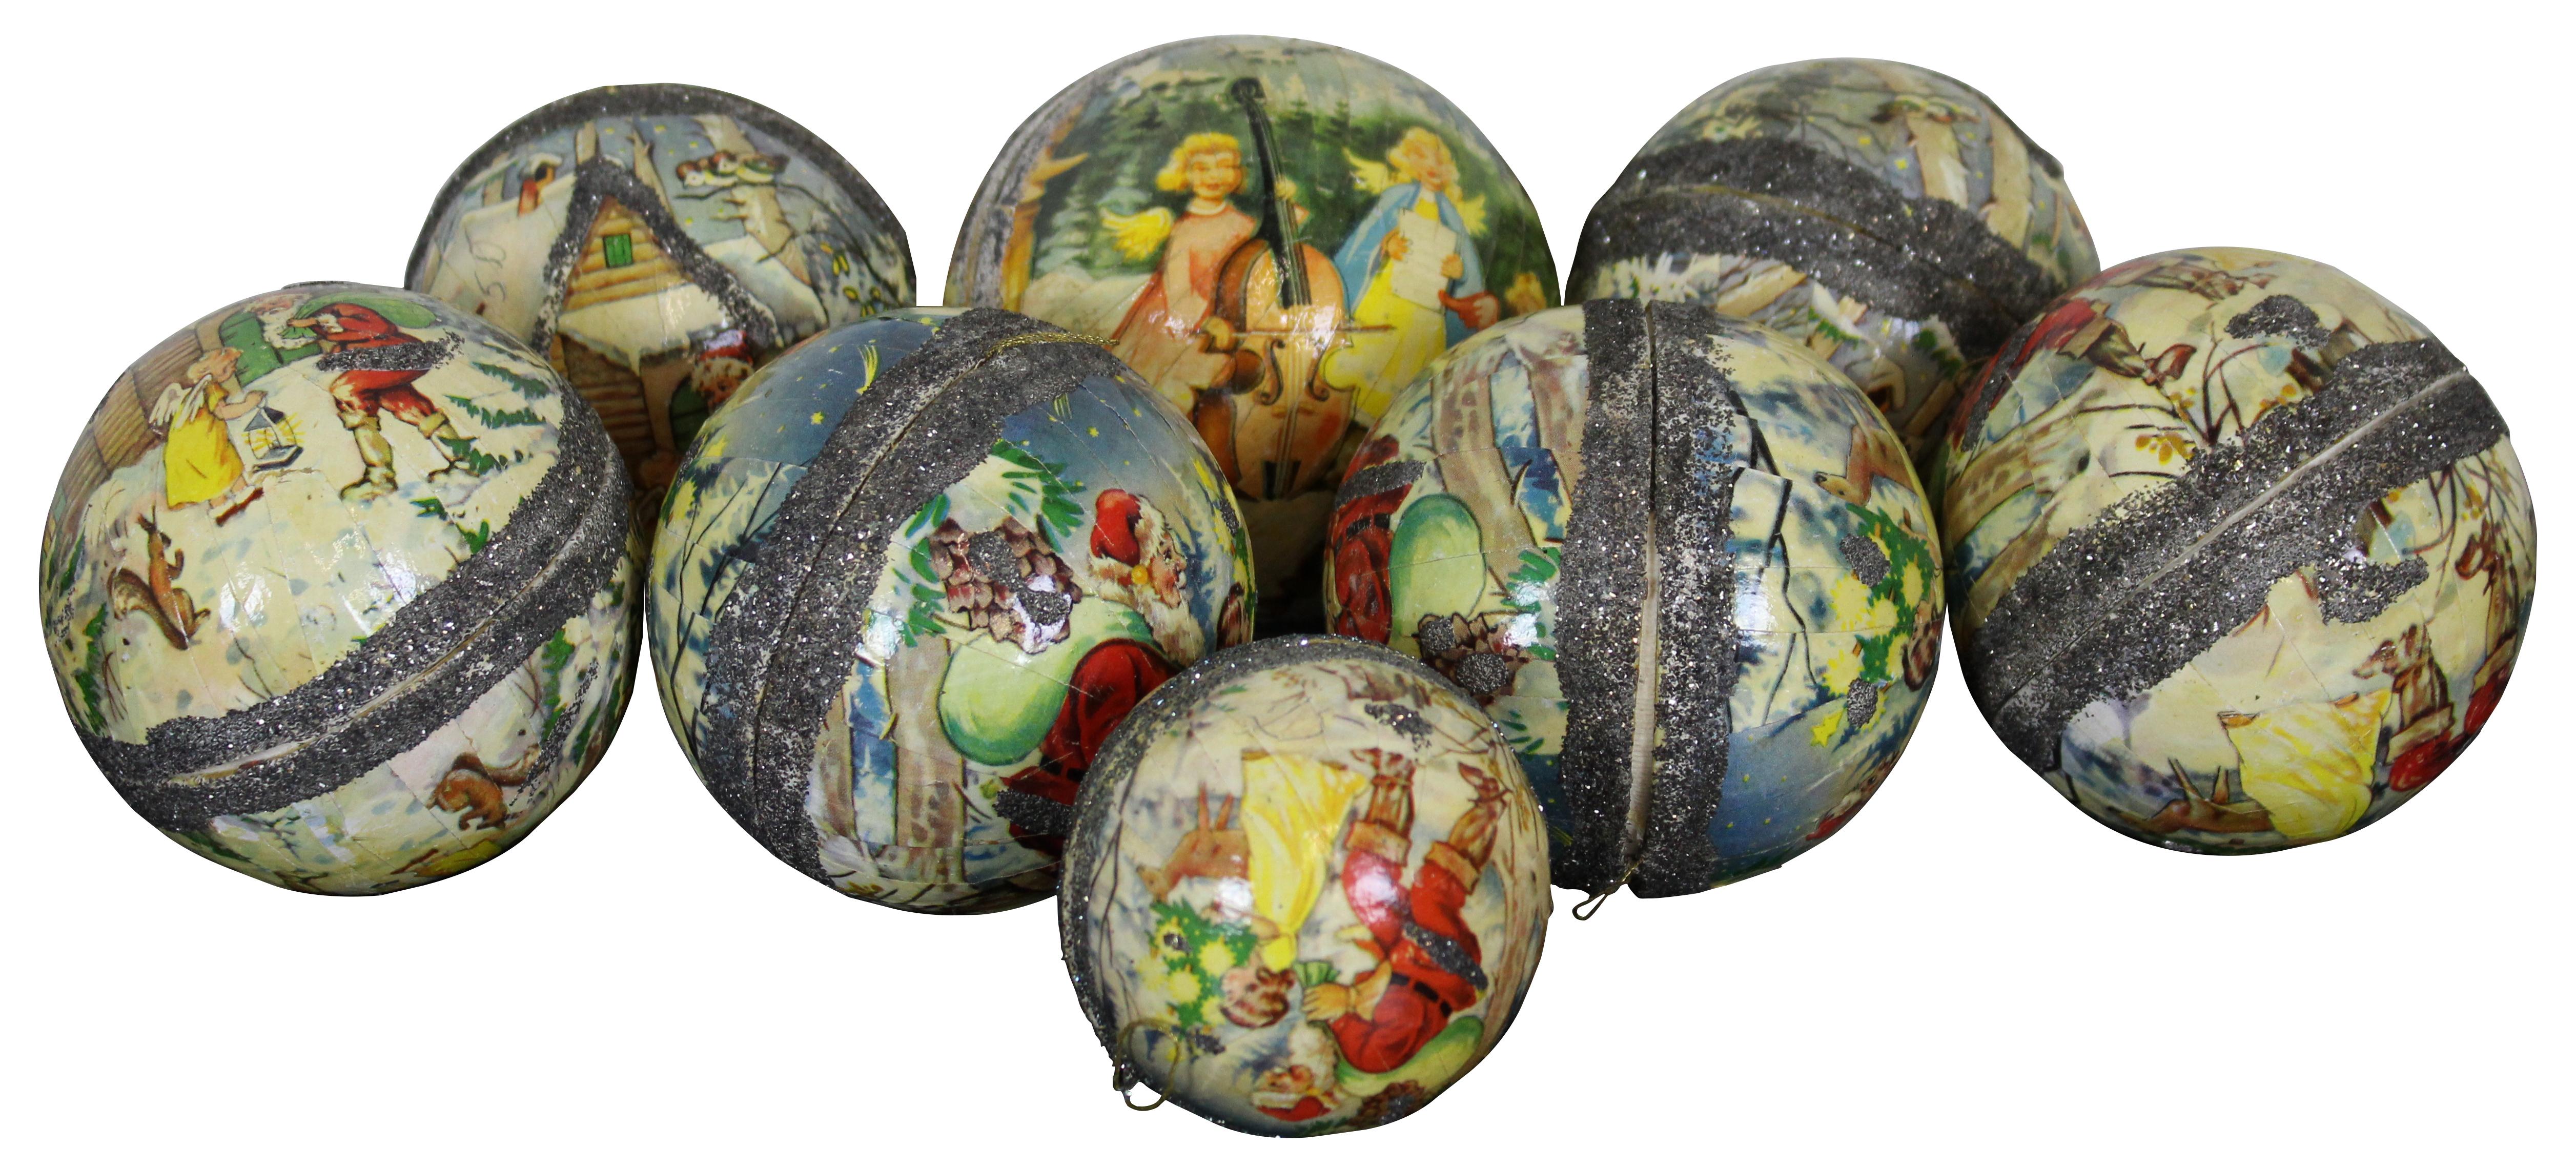 Lot of fifteen vintage West German paper mache Christmas ornament ball candy containers, eight featuring three different lithograph scenes of Santa Claus, children and angels; the remaining seven are painted in solid colors accented with silver